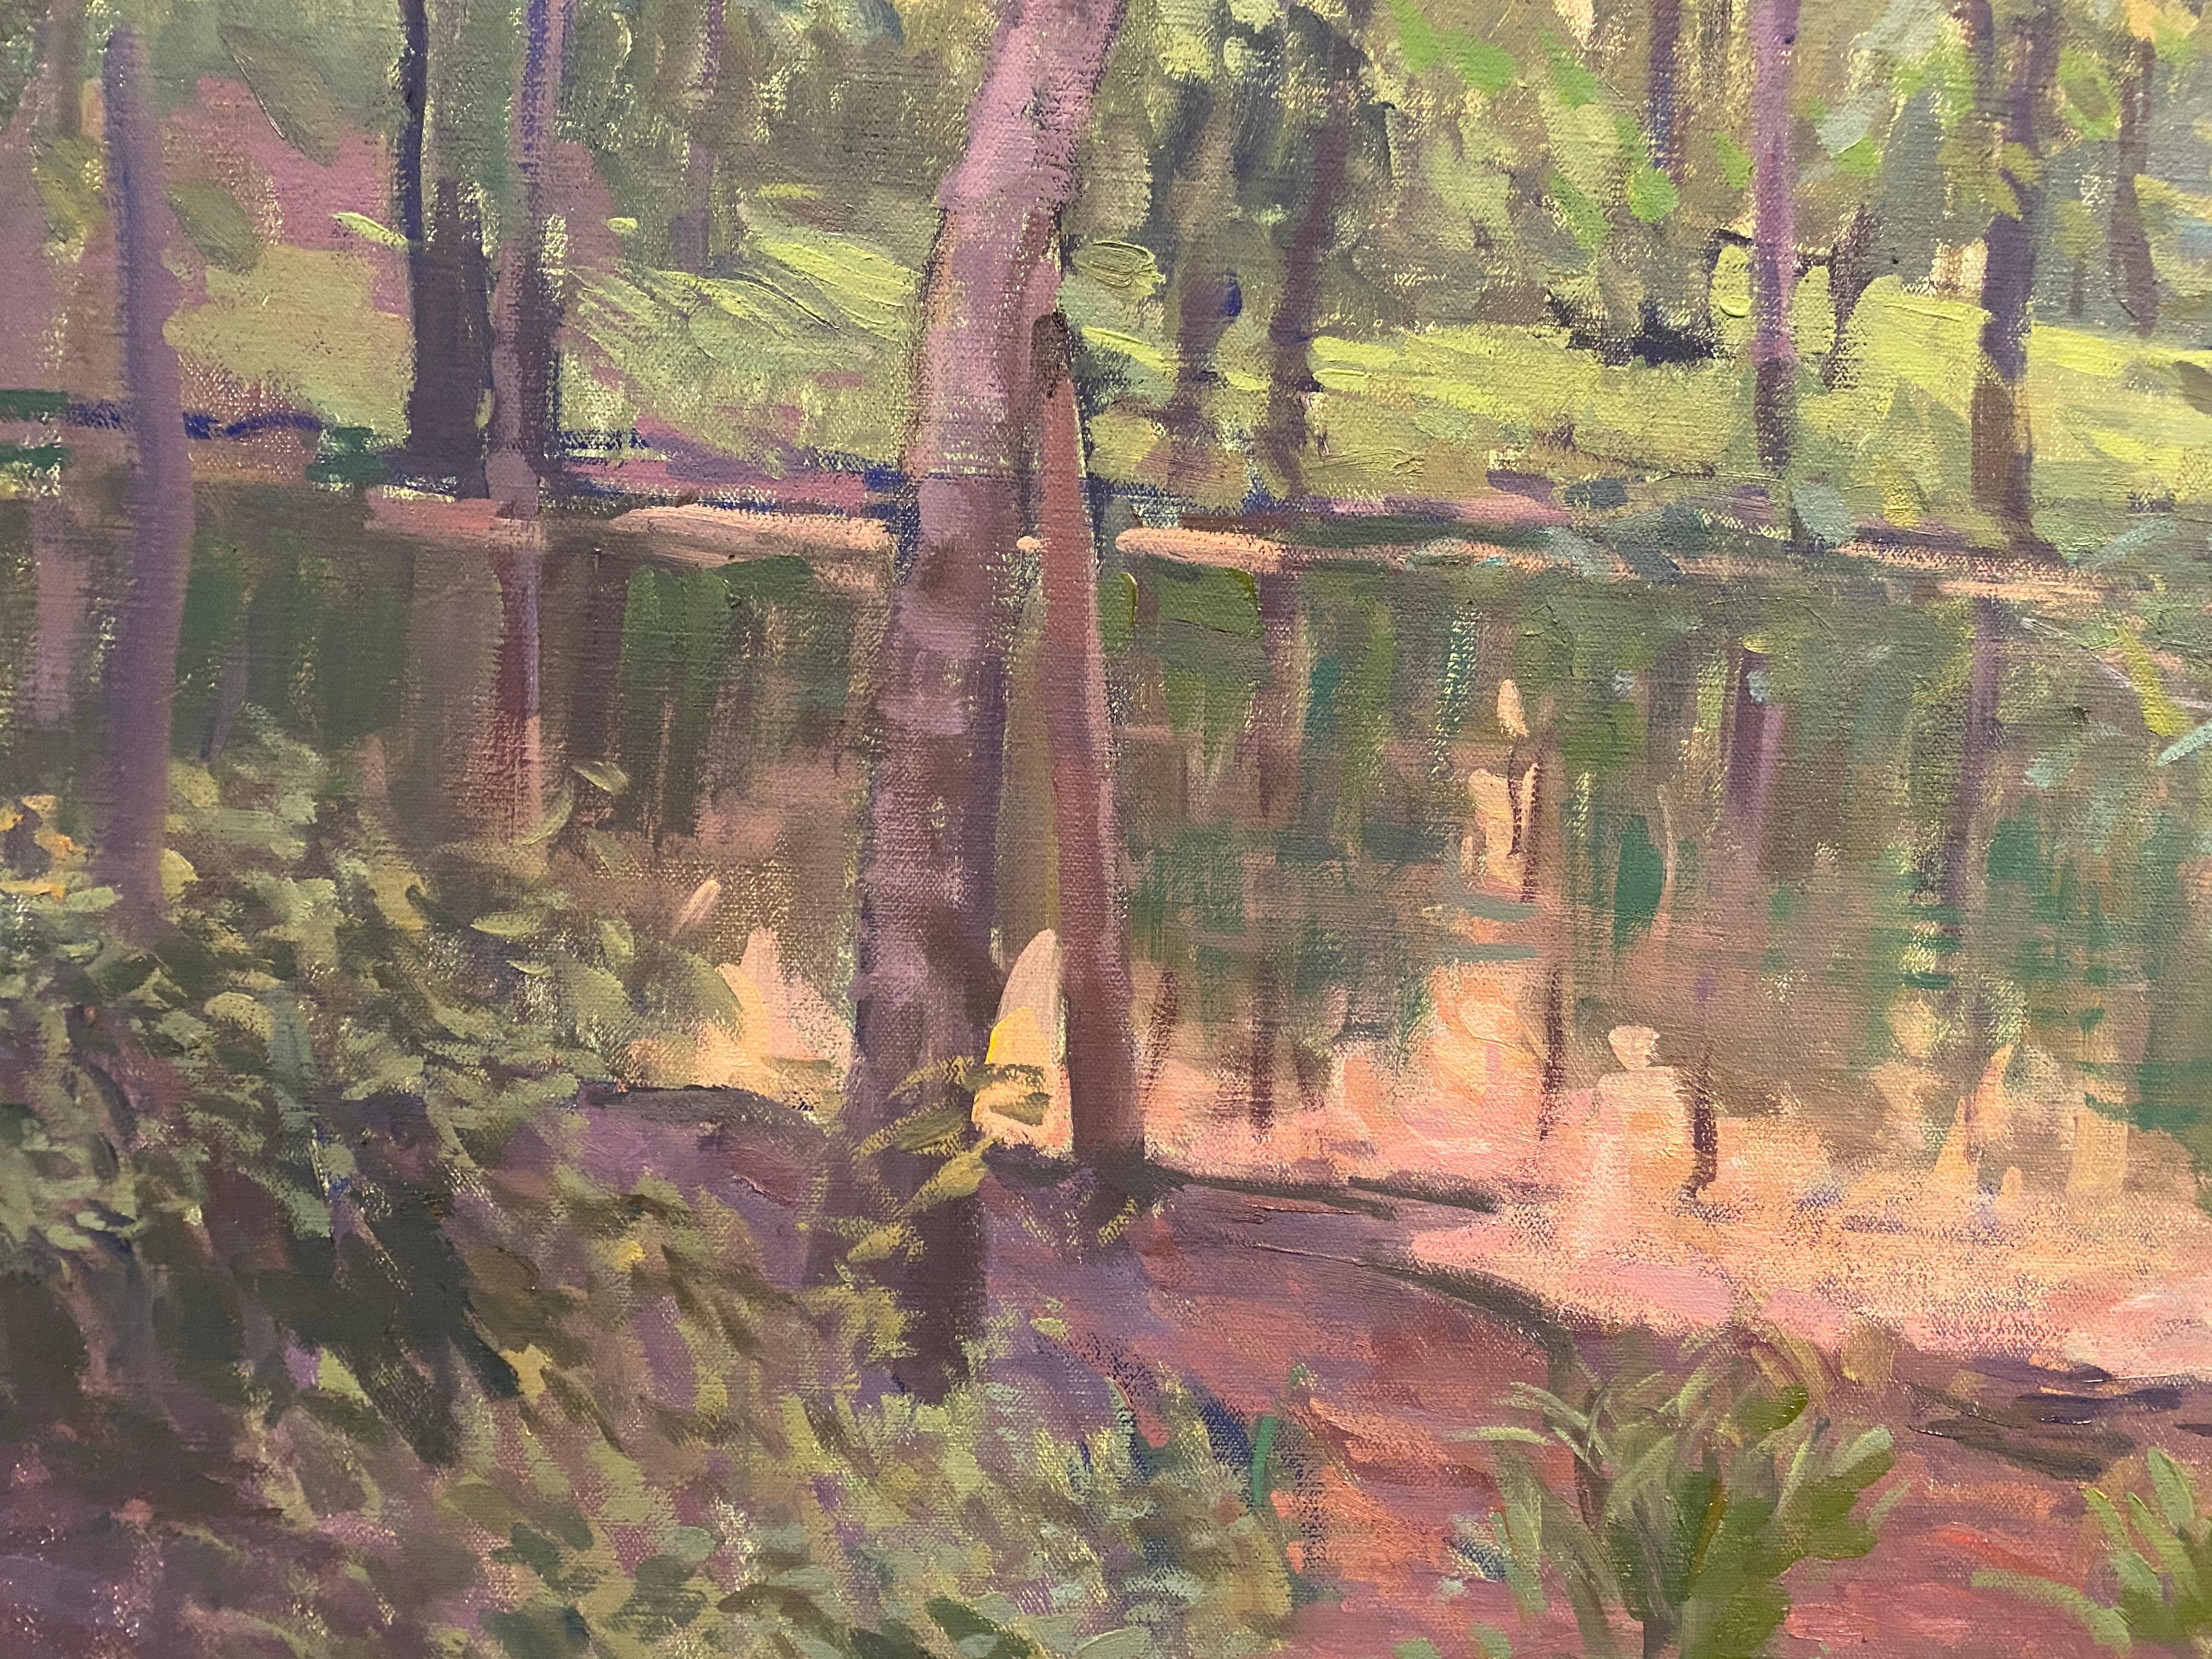 Twilight Pond, Early Summer 1